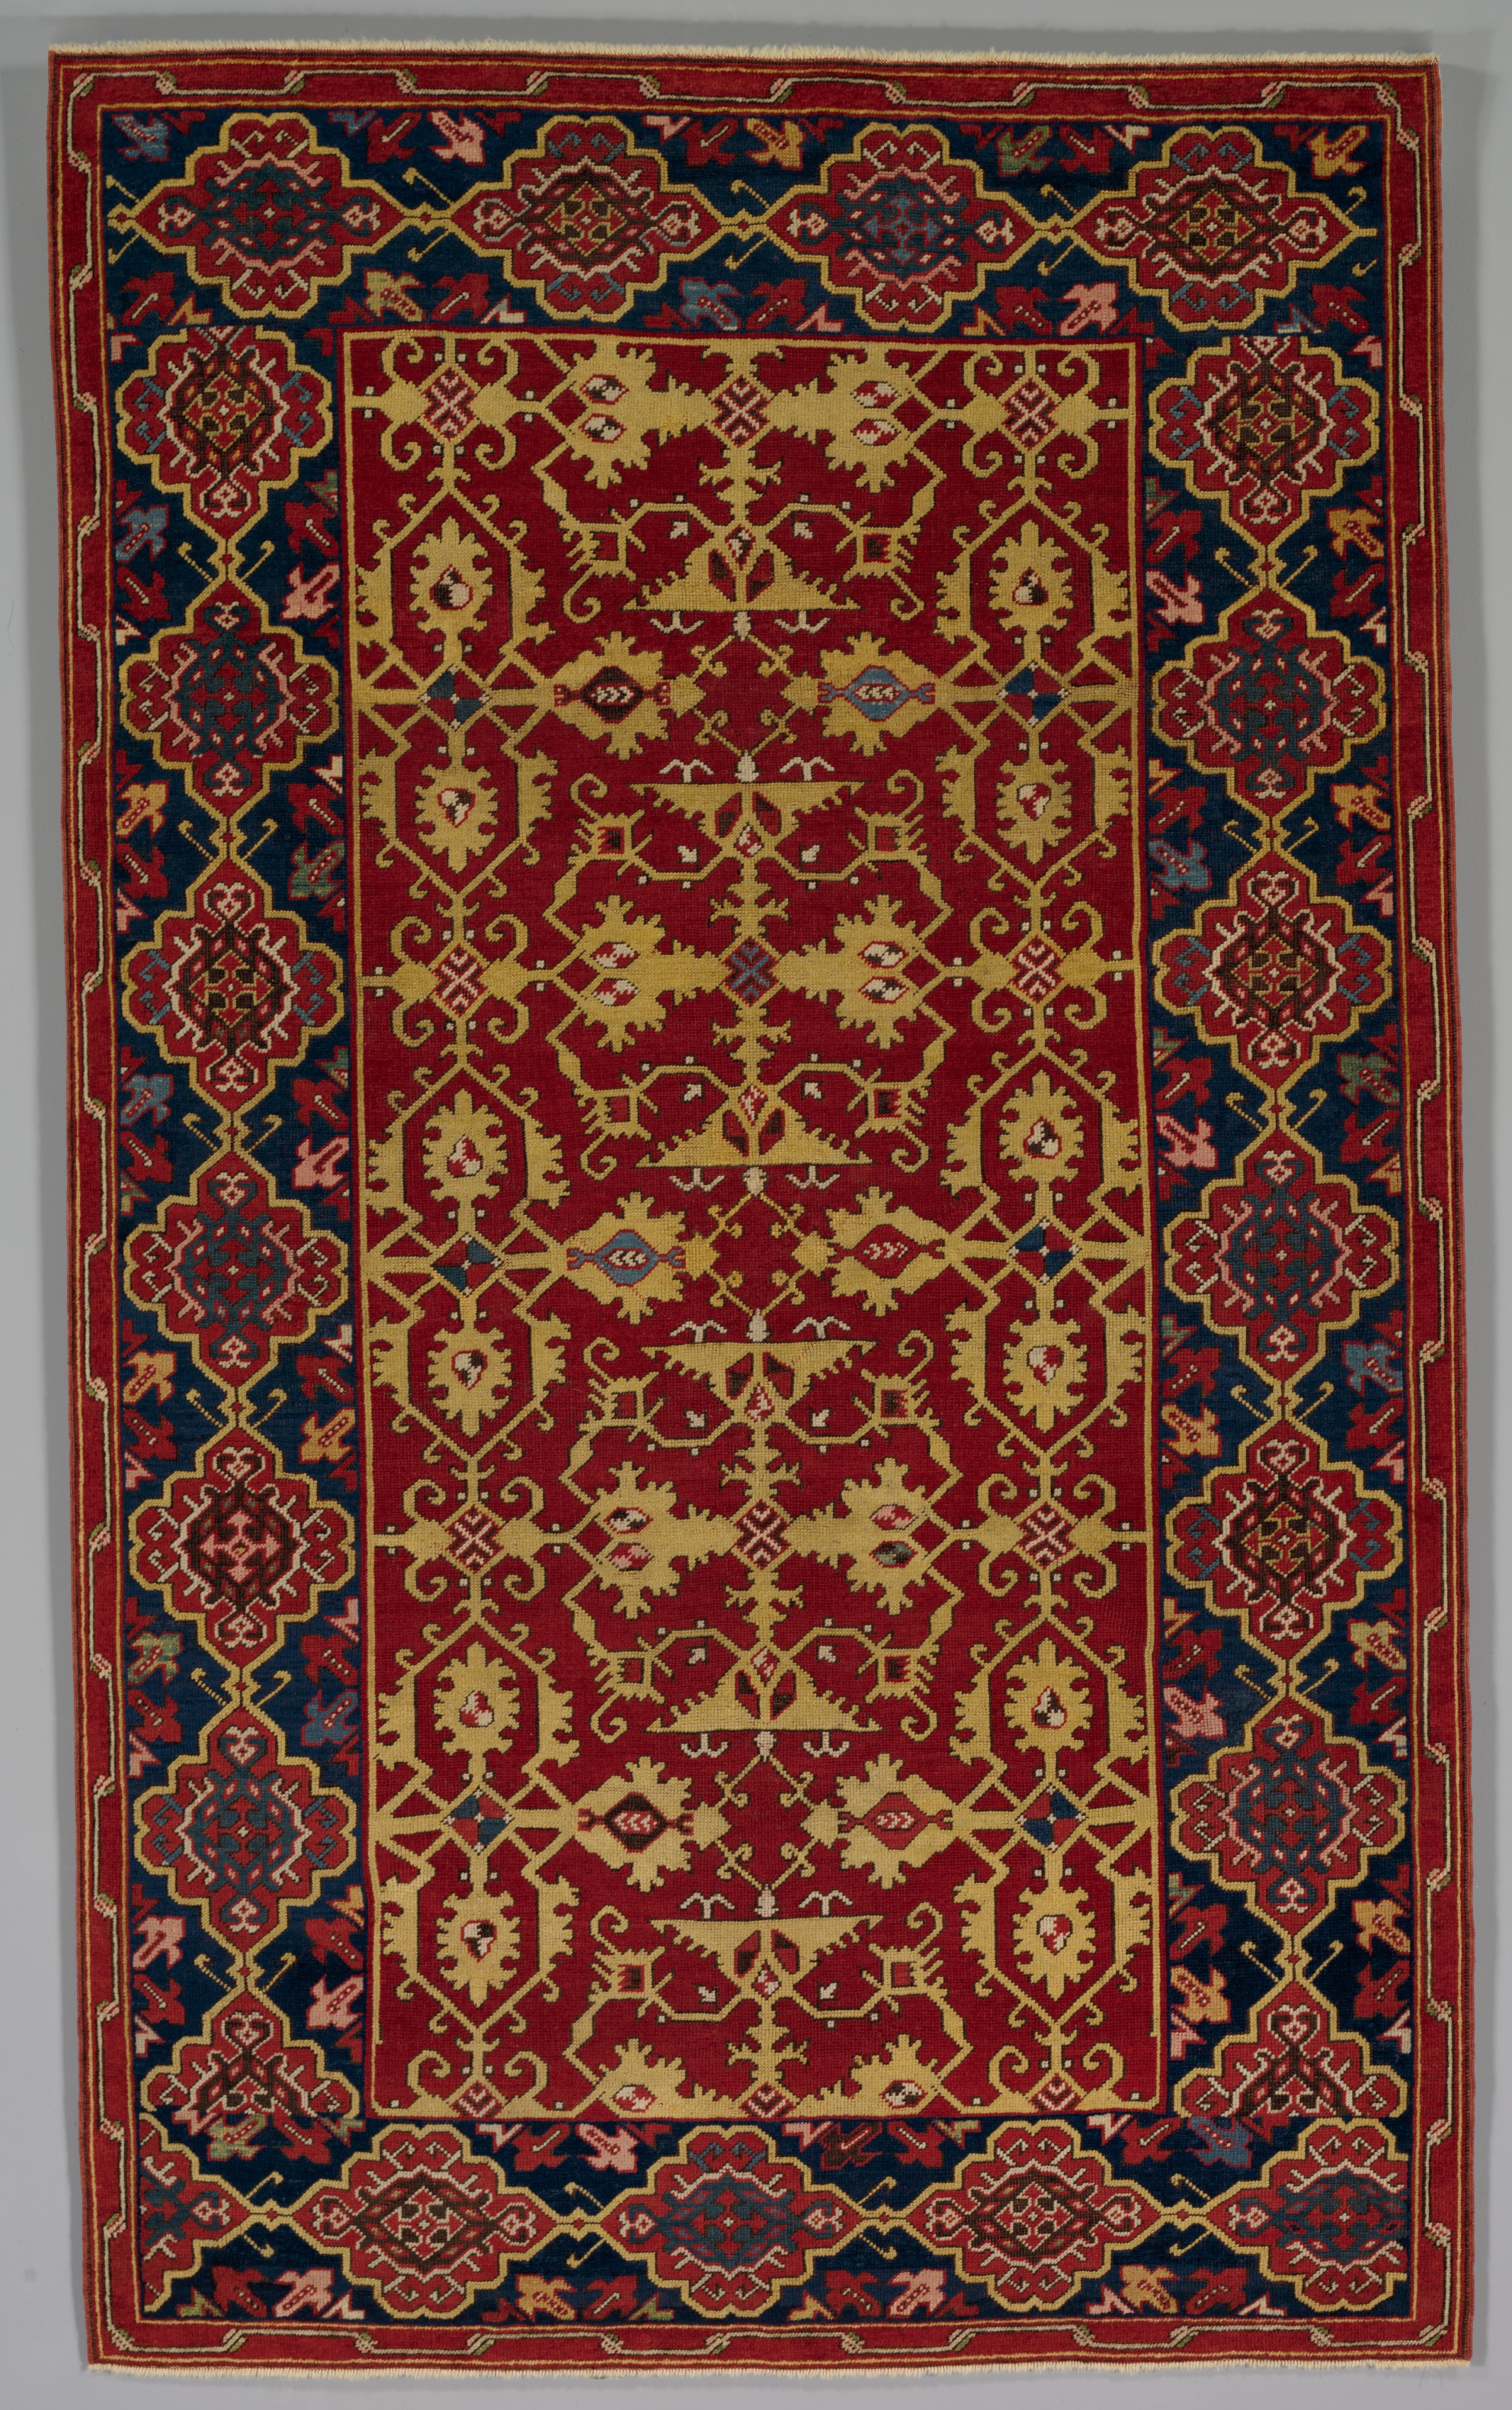 Classical Turkish Carpet with the Lotto Pattern